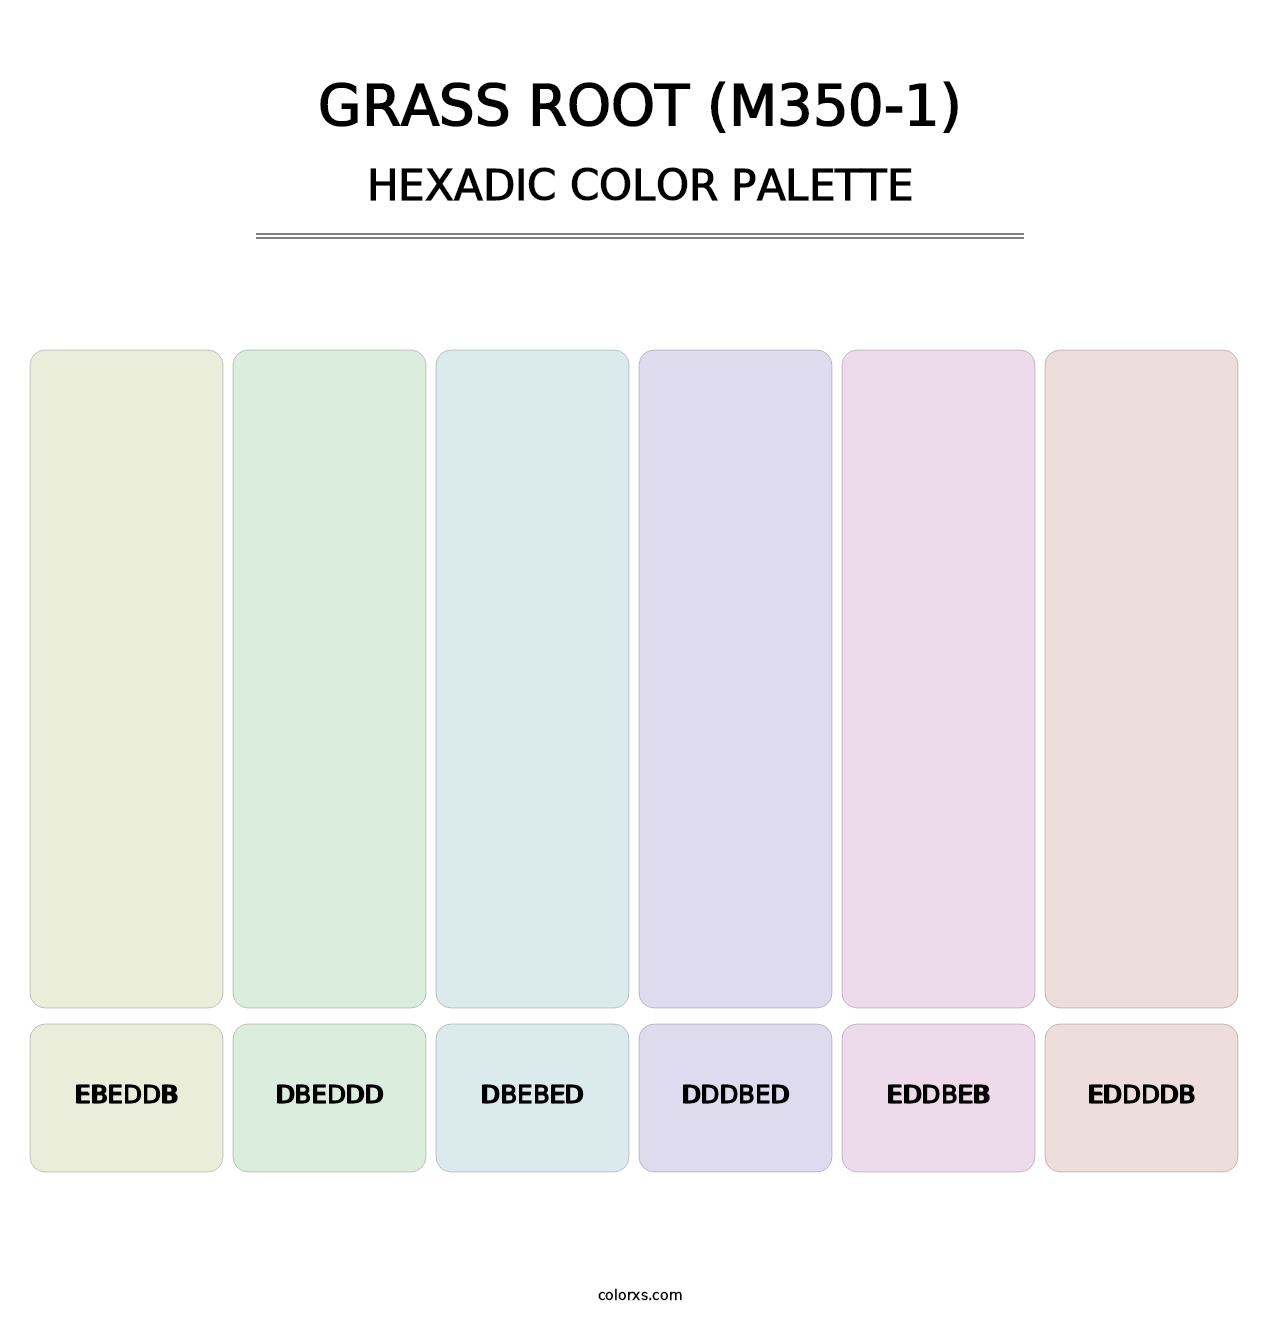 Grass Root (M350-1) - Hexadic Color Palette